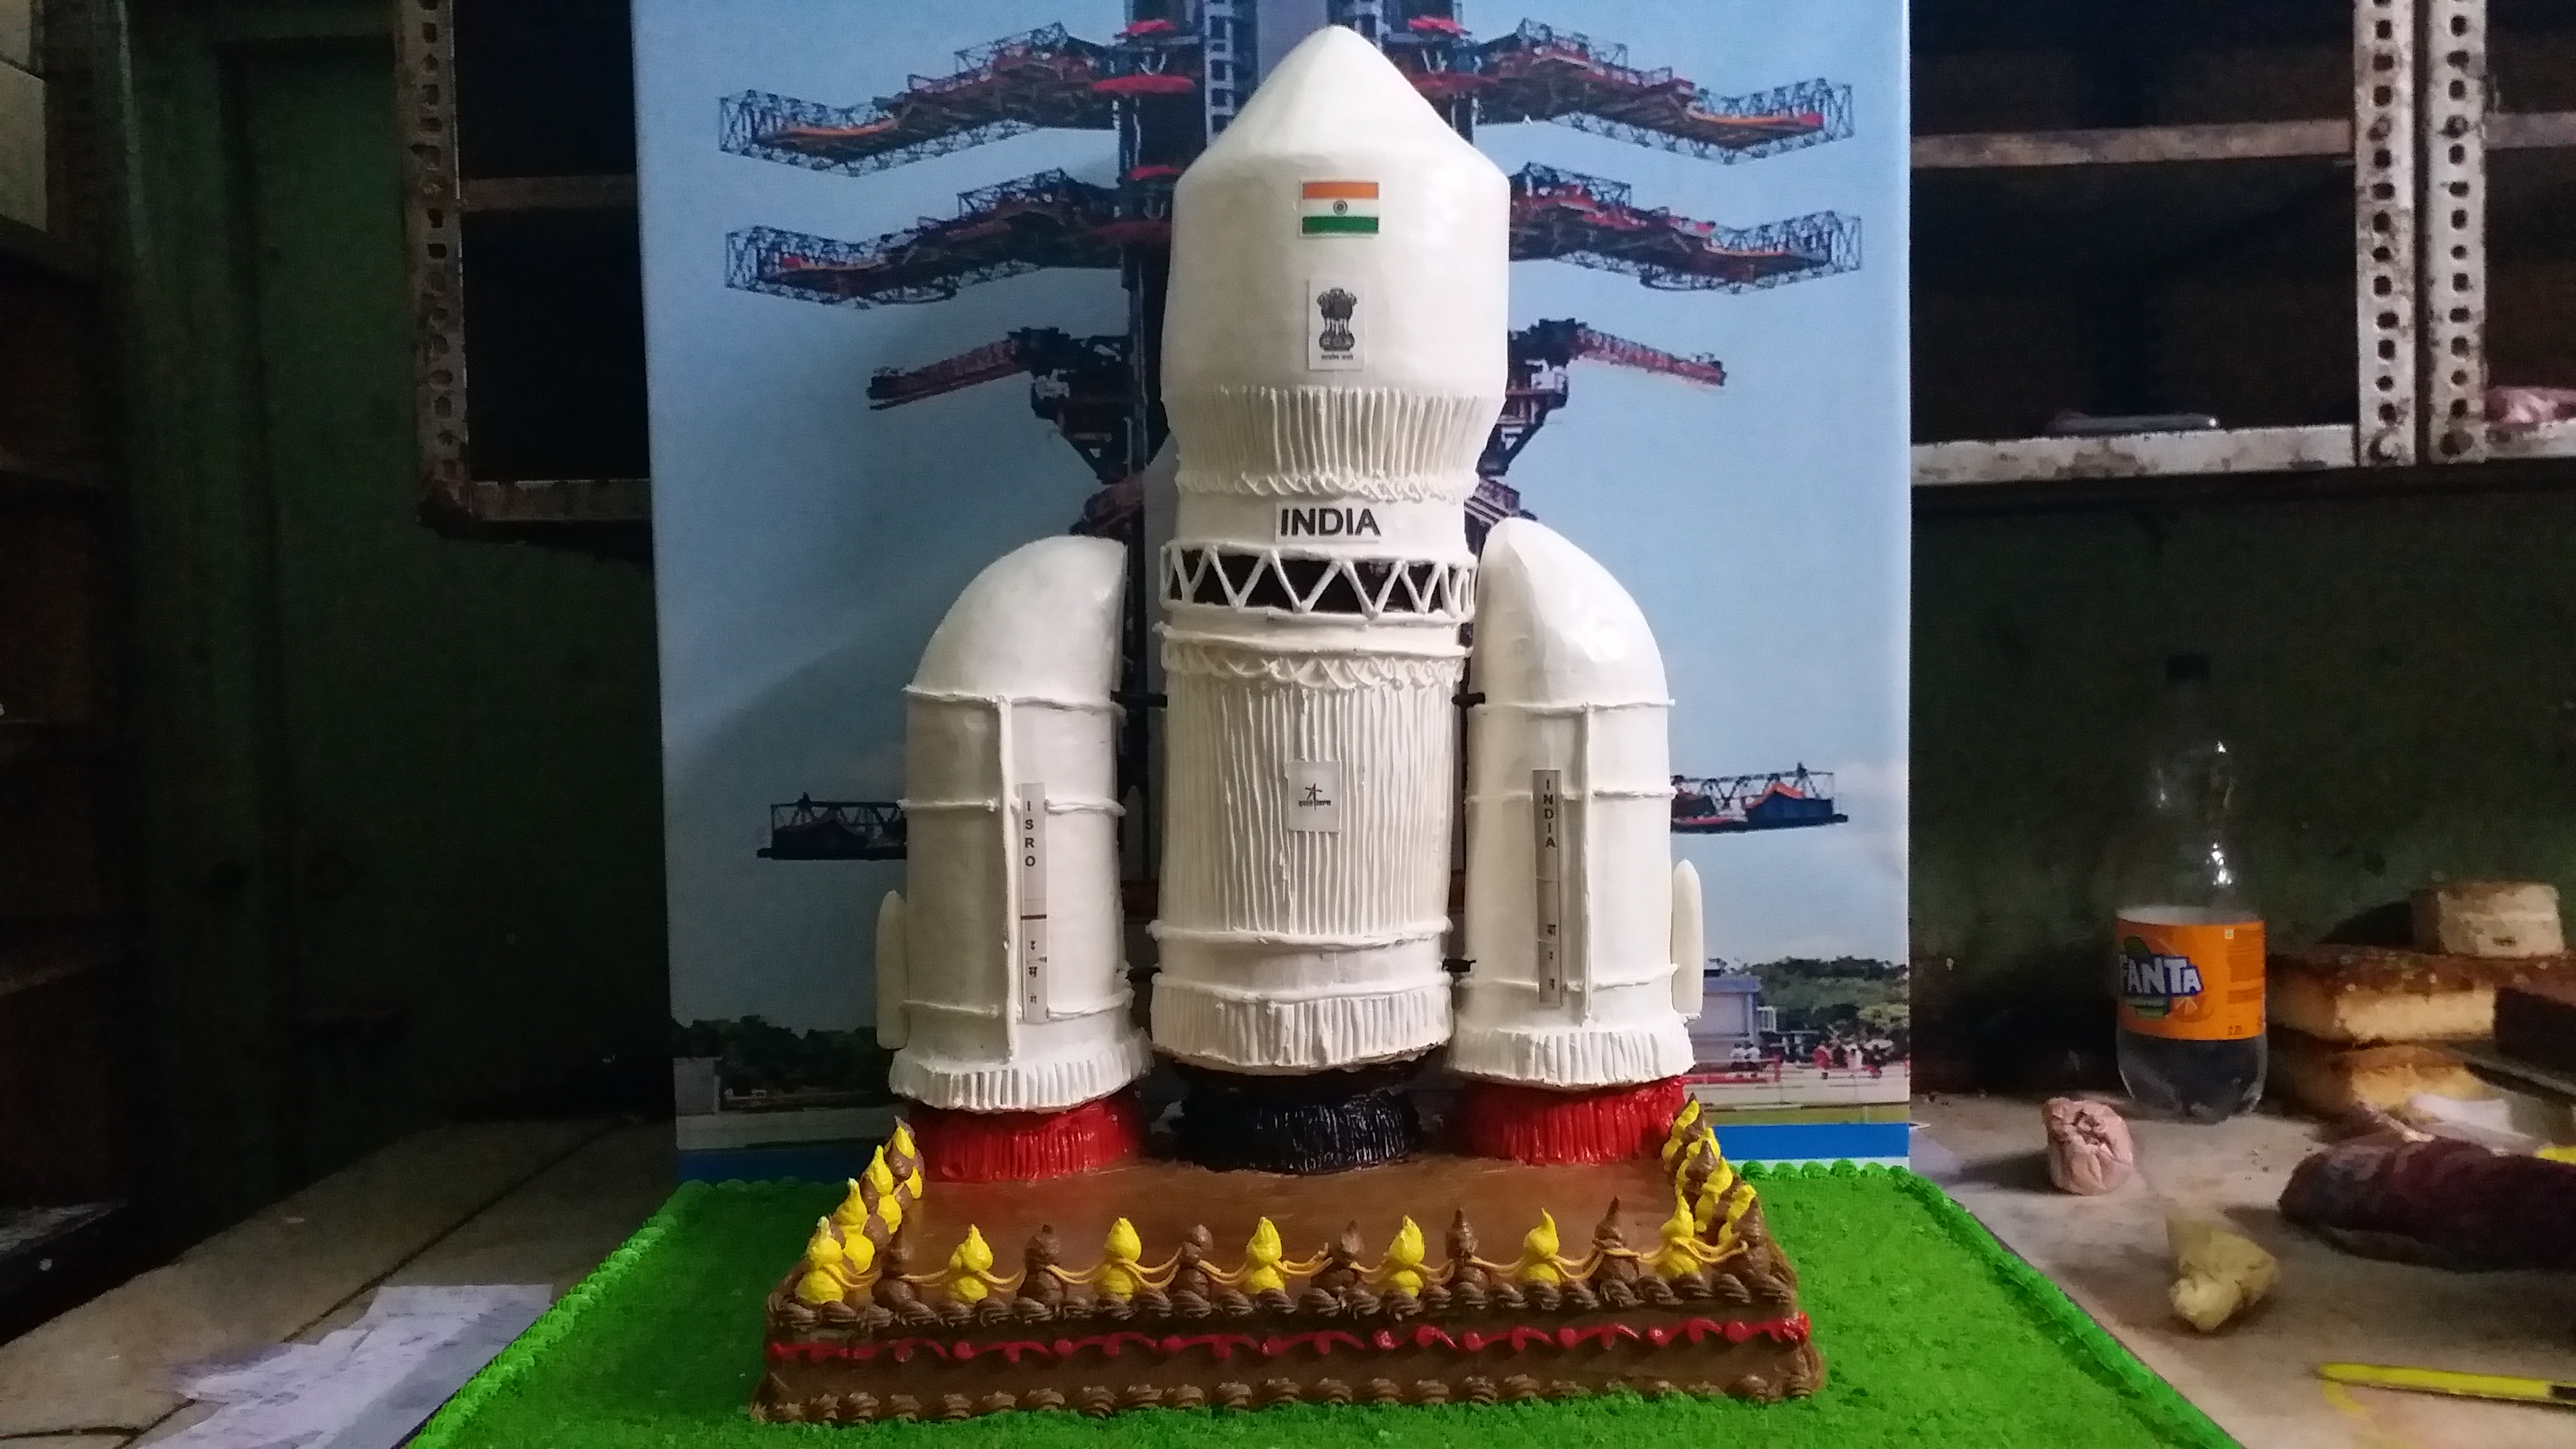 Chandrayaan 2 cake for auction